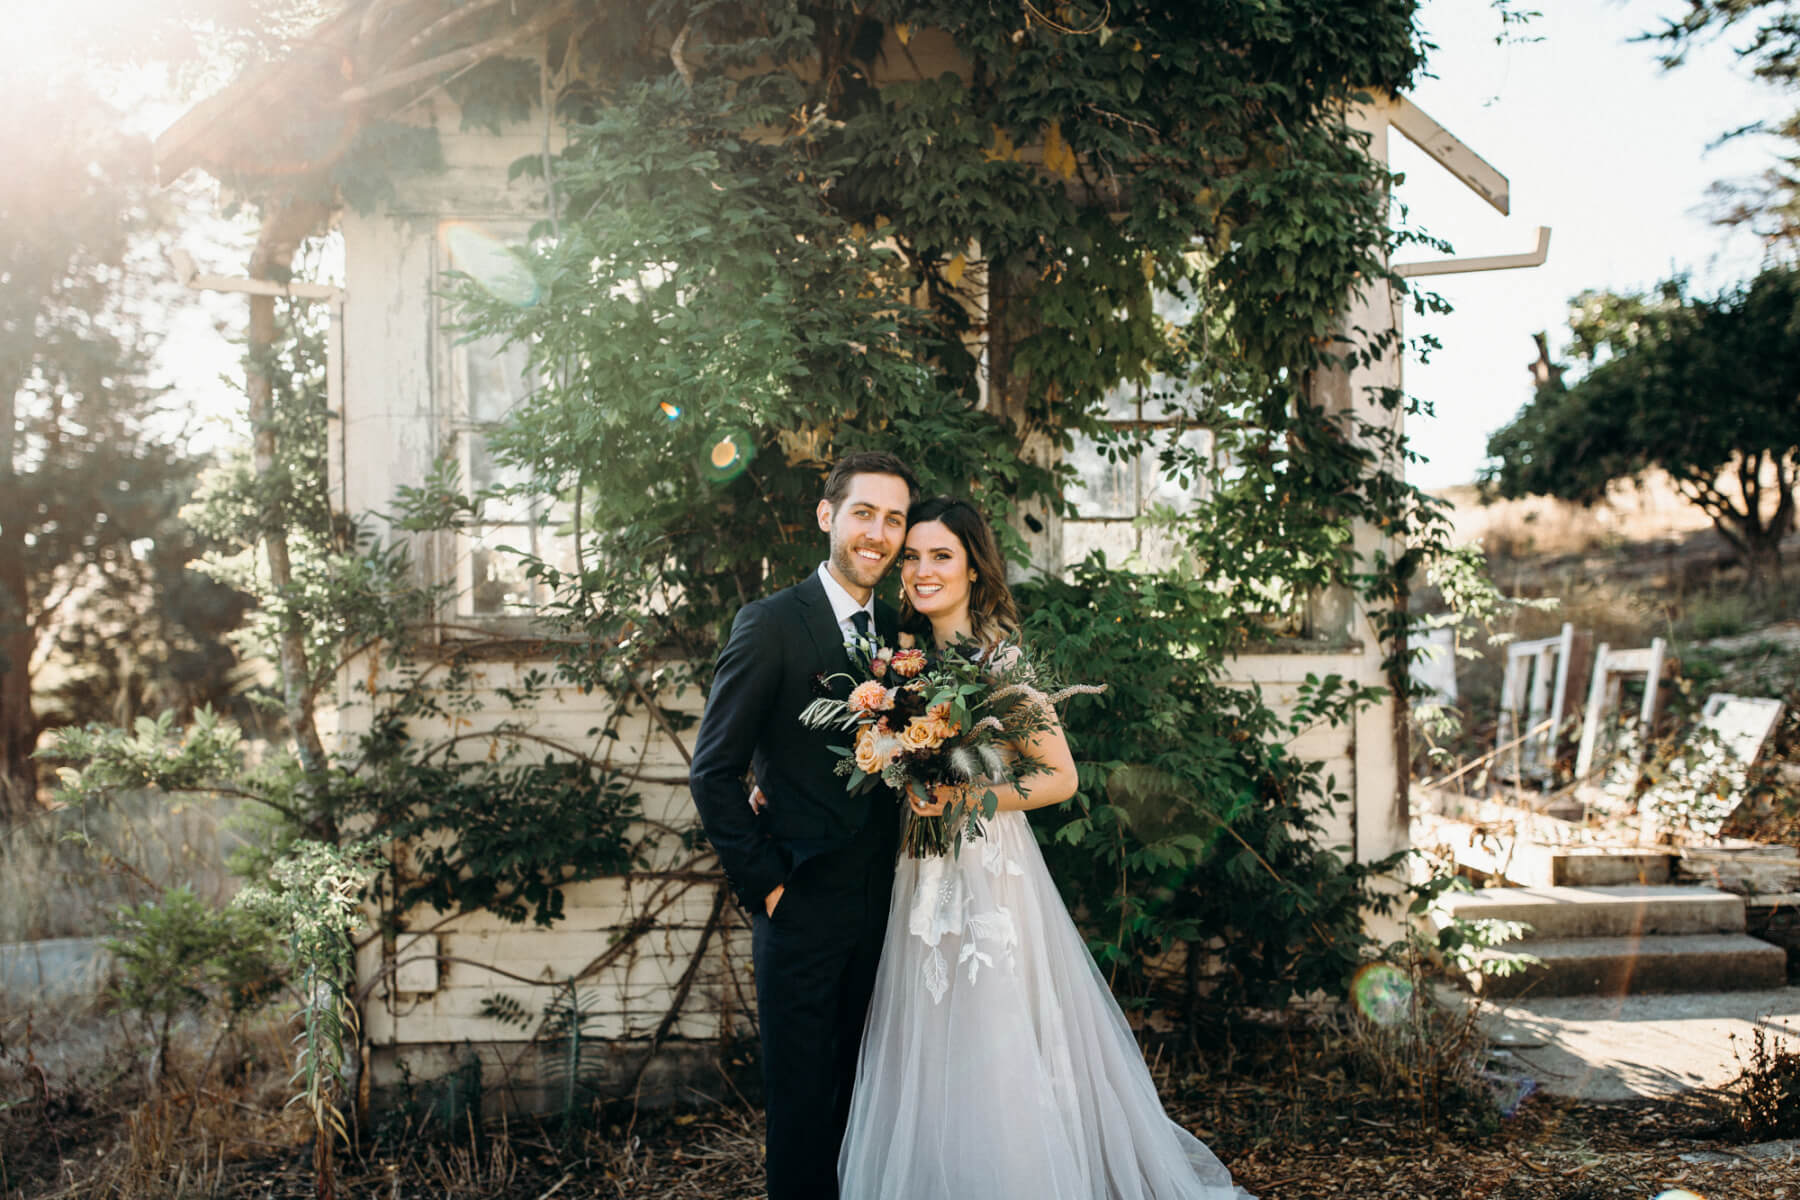 Groom and bride holding floral wedding bouquet standing in front of rustic ranch building outdoors at Stemple Creek Ranch in Marin County